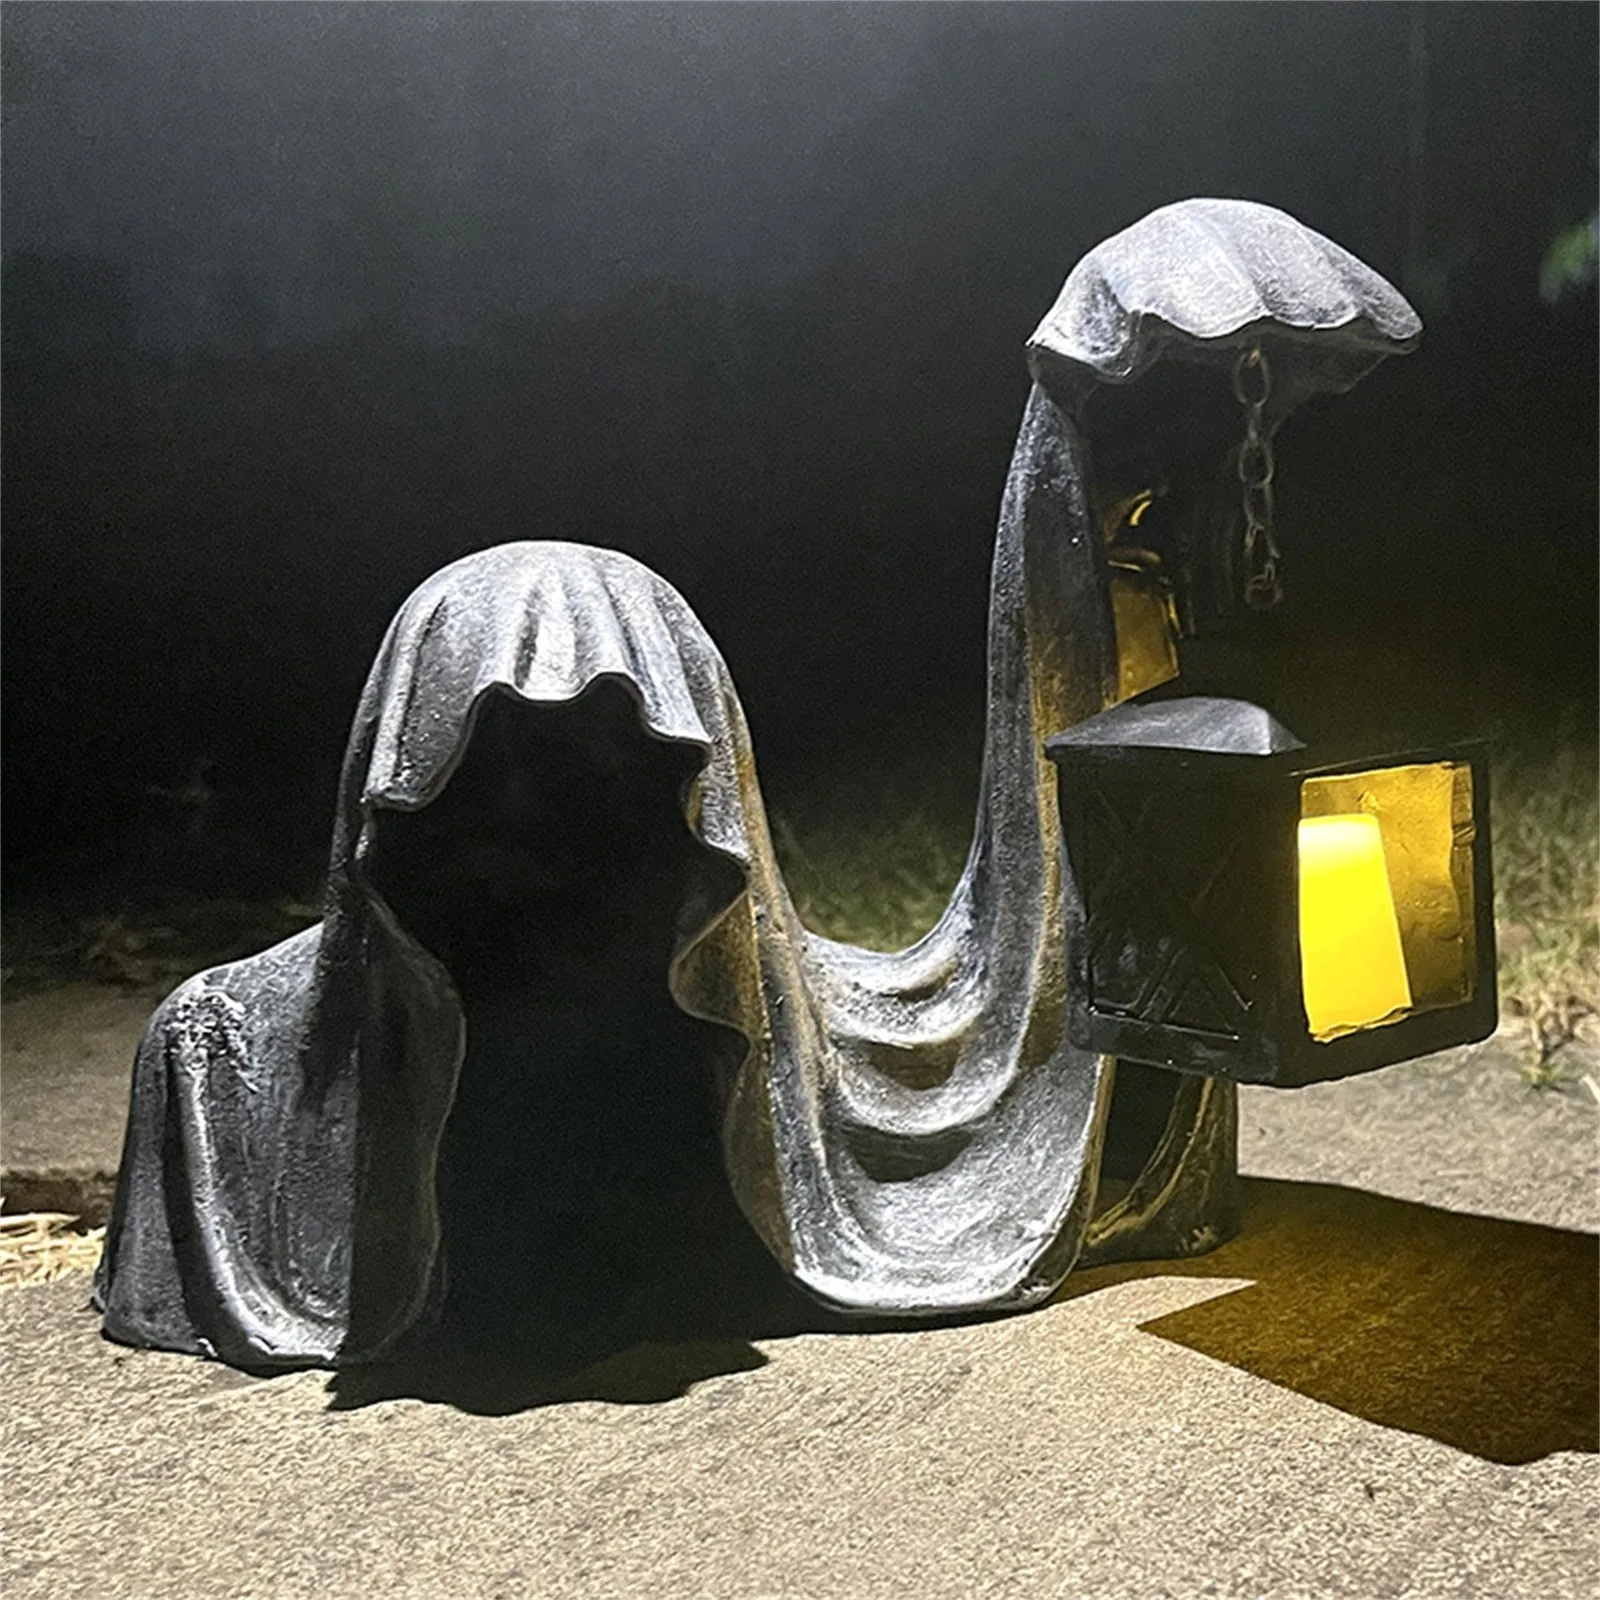 

Ground Reaper With Lantern Resin Ornament Decorative Lantern Ghost Sculpture Statue Halloween Party Statue Outdoor Decorations